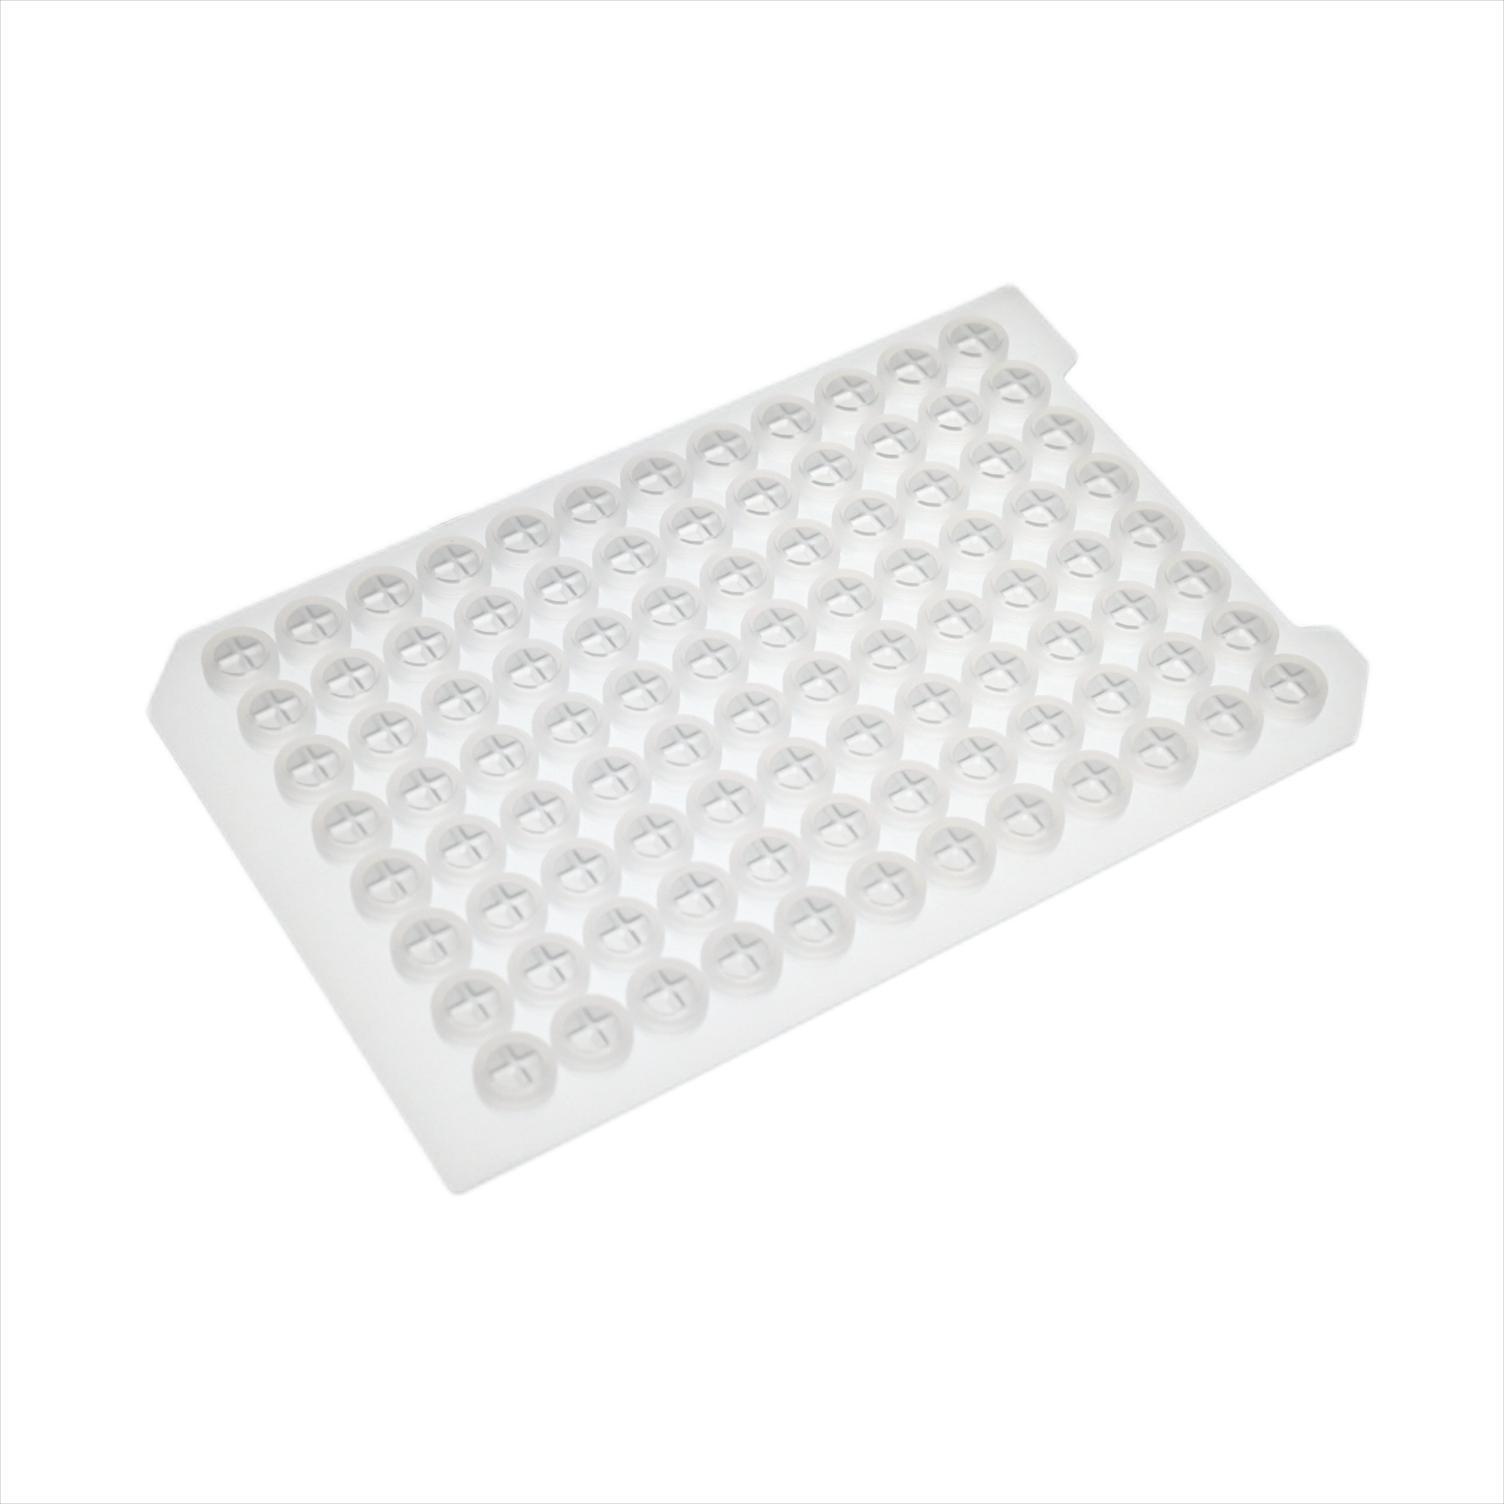 96 round well silicone sealing mat